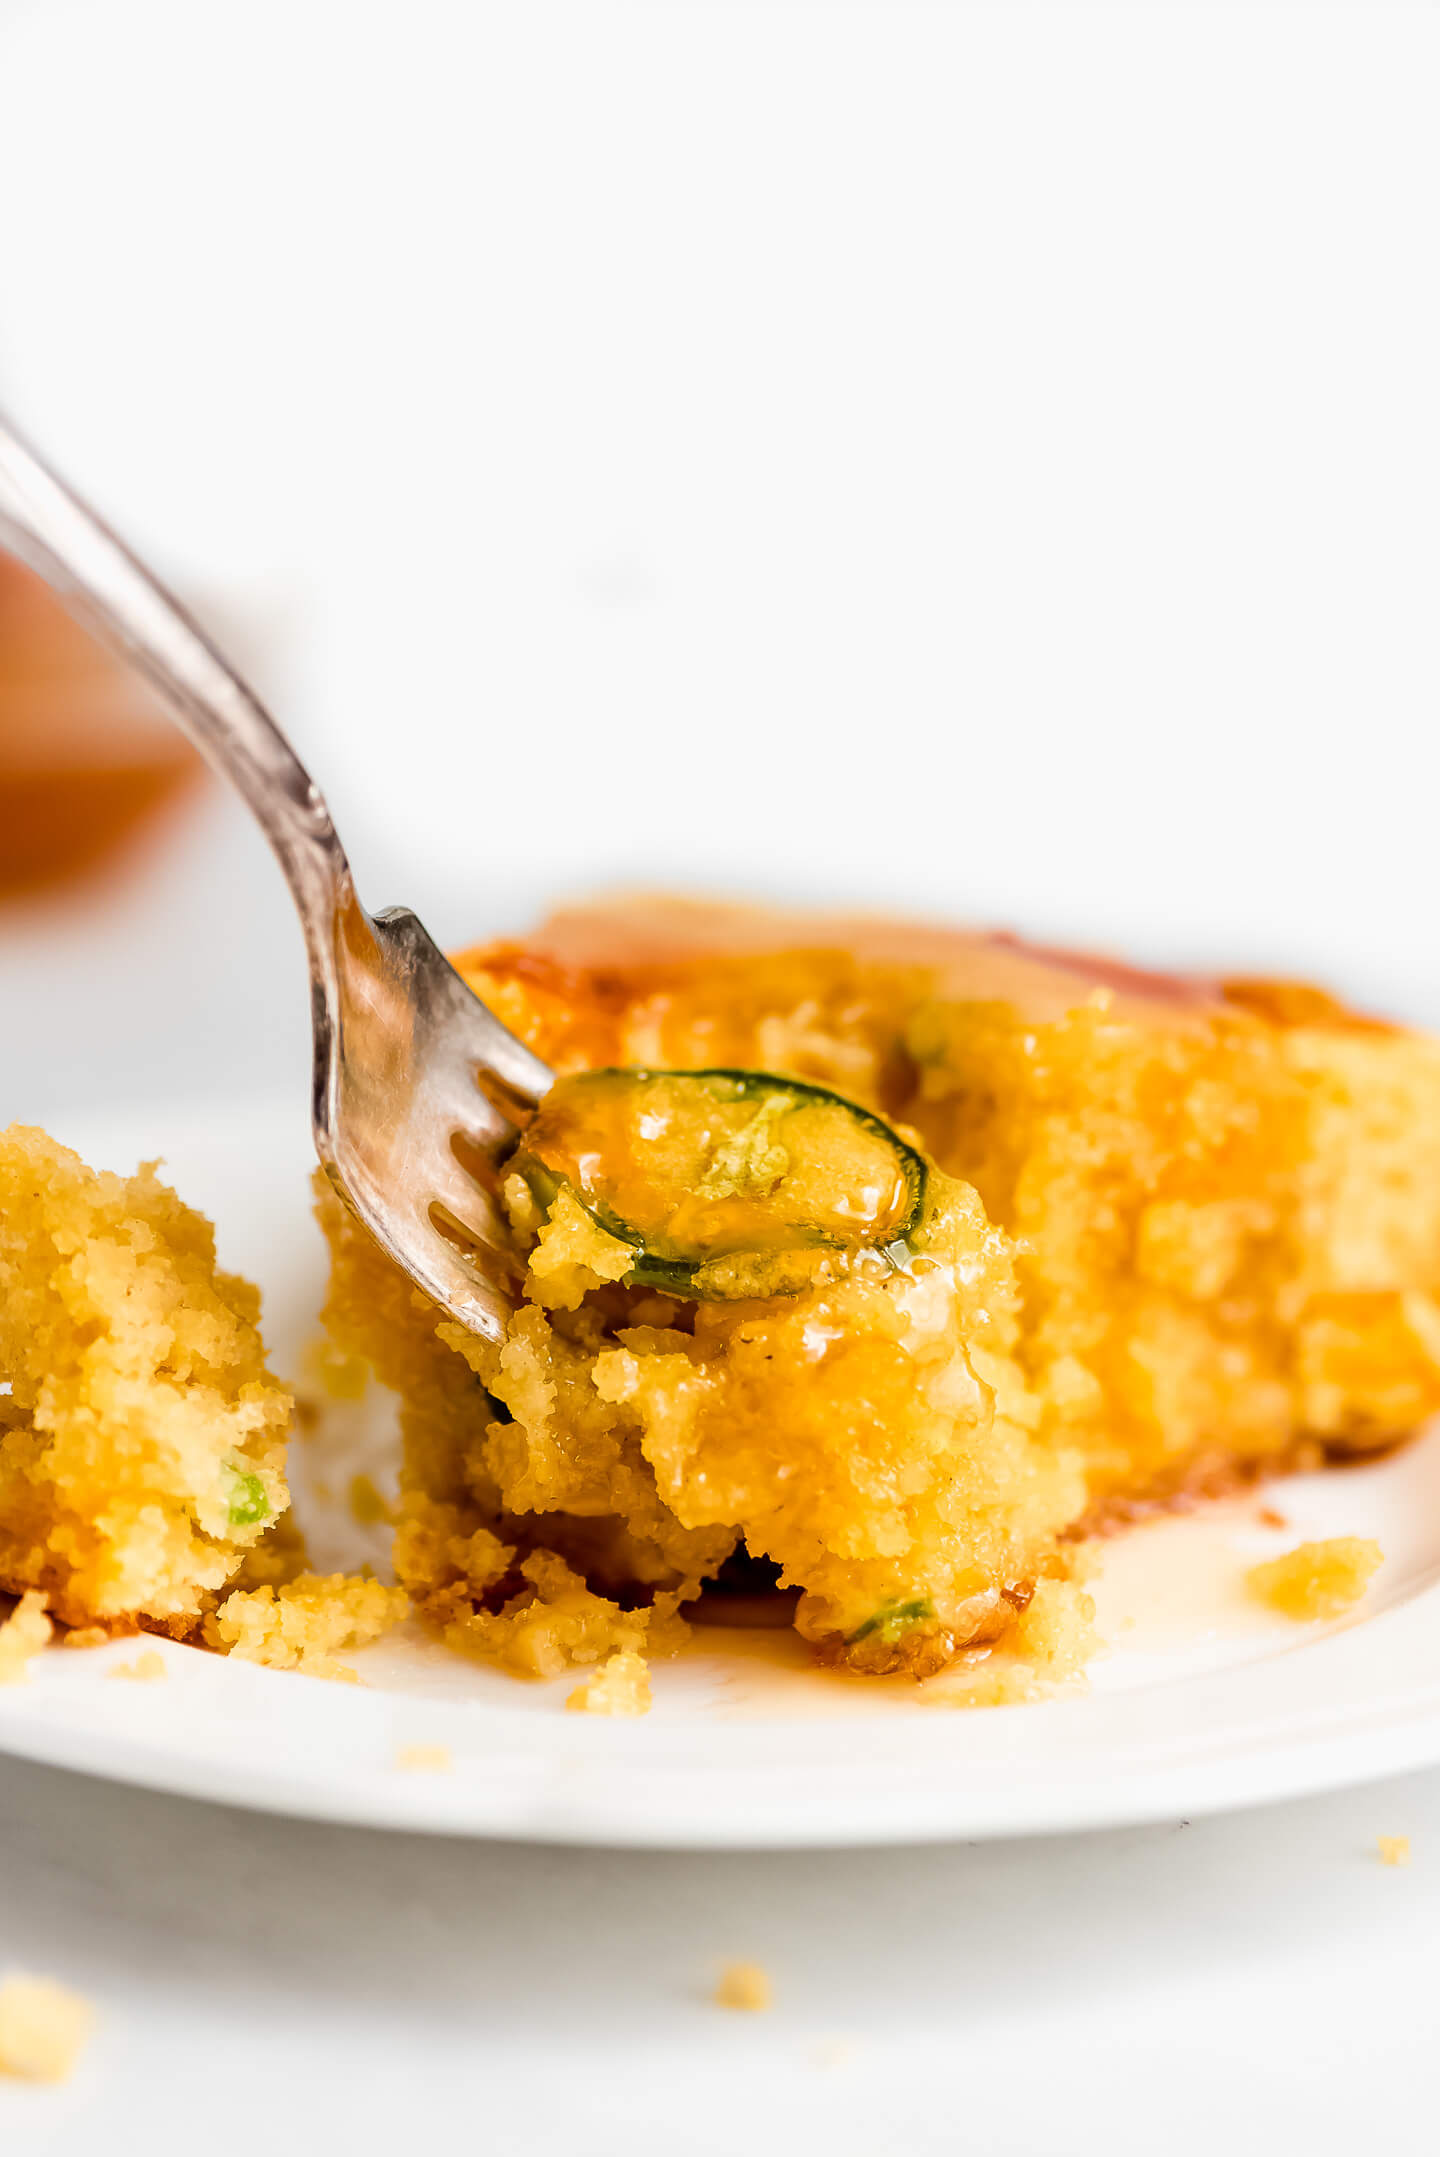 A fork lifting a bite of jalapeno cornbread drizzled with honey.